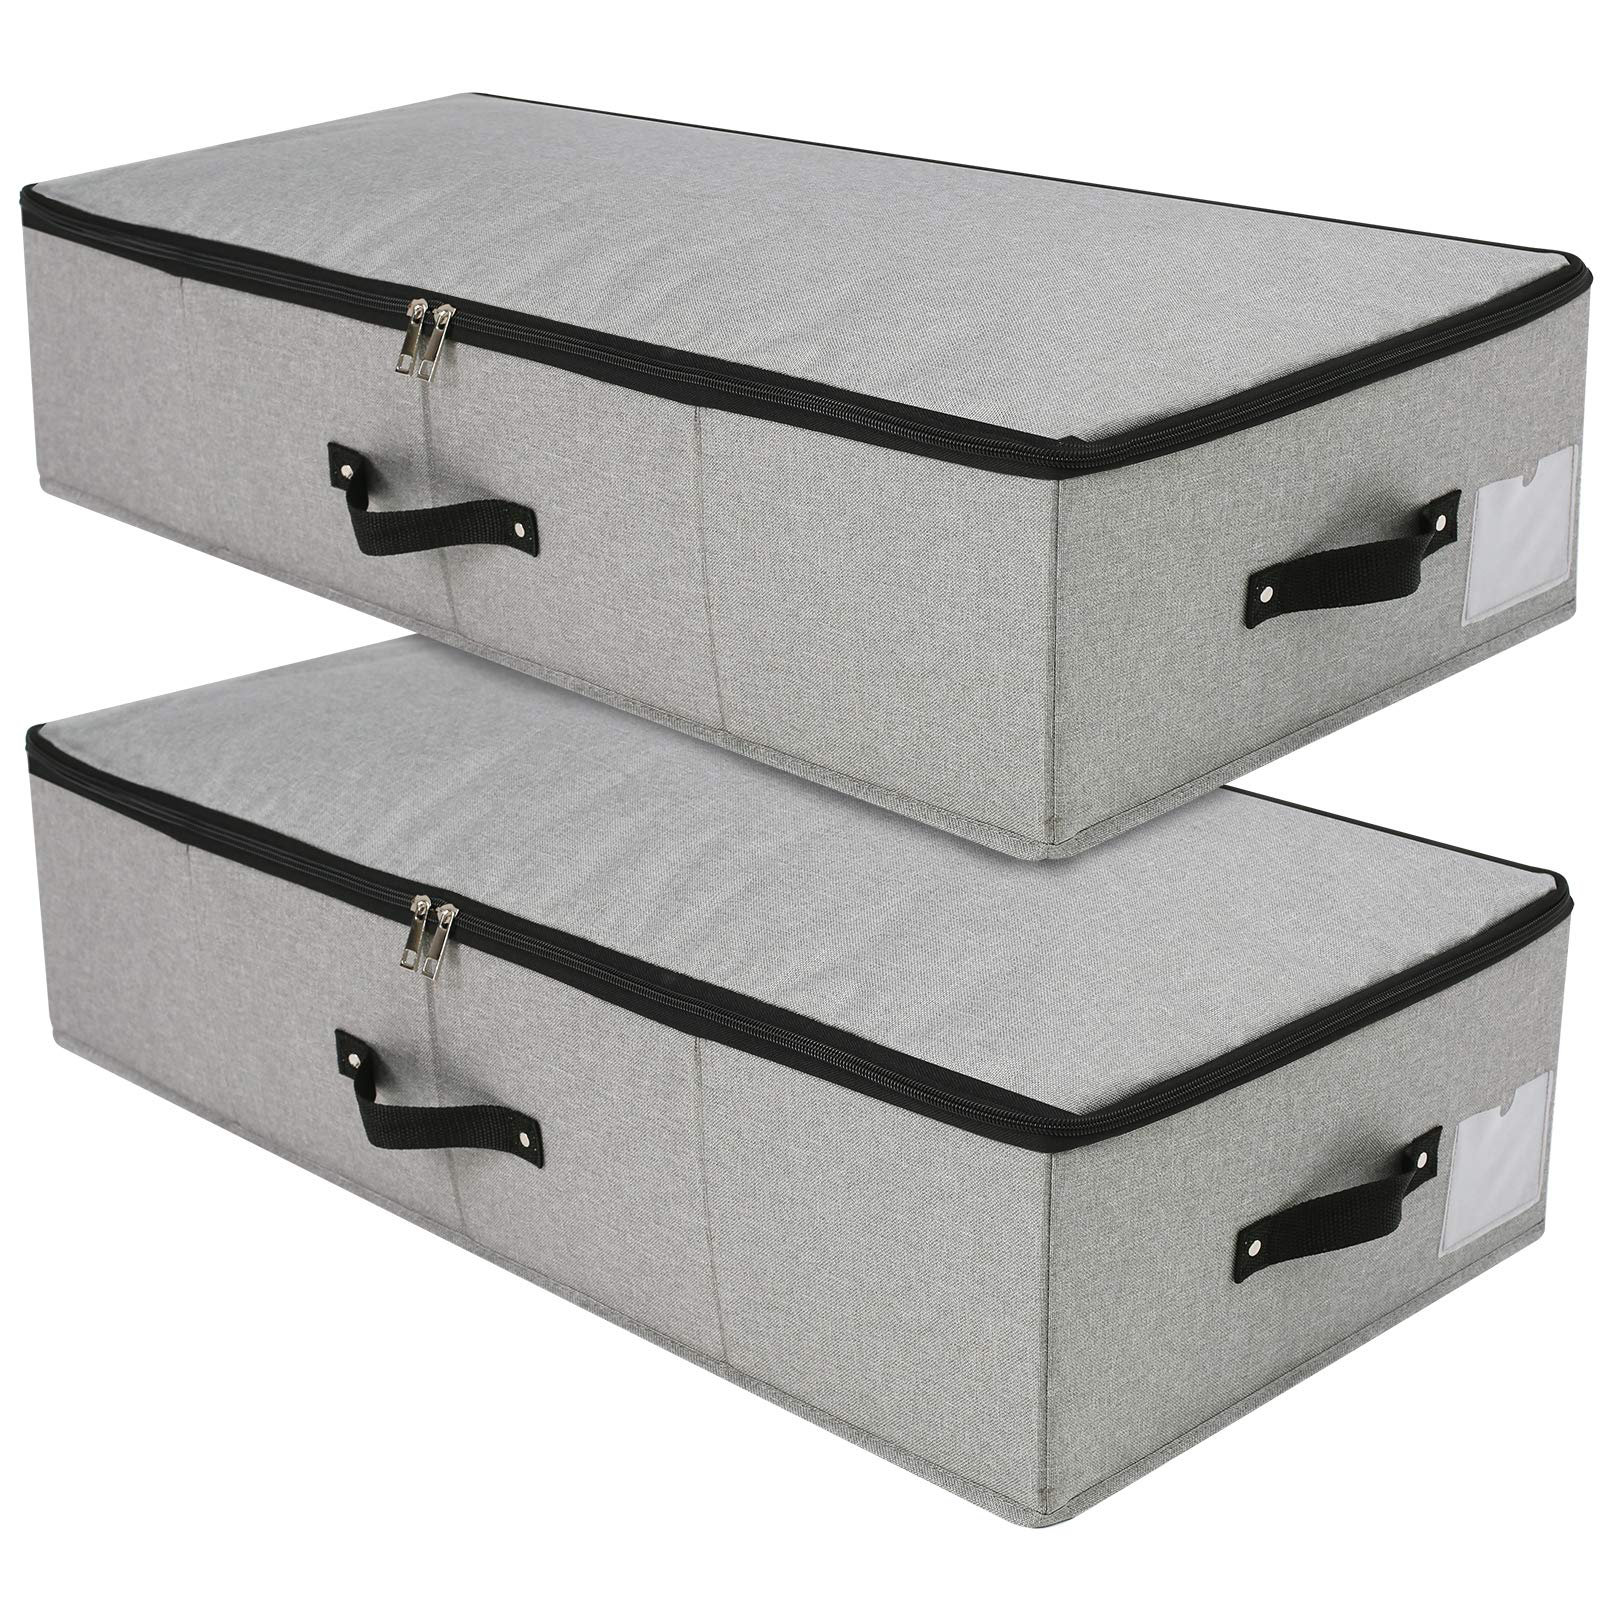 2pcs Xl Storage Bags, Foldable Clothes Closet Storage Boxes, Durable  Handles, Thick Fabric, Suitable For Blankets, Quilts, Bedding